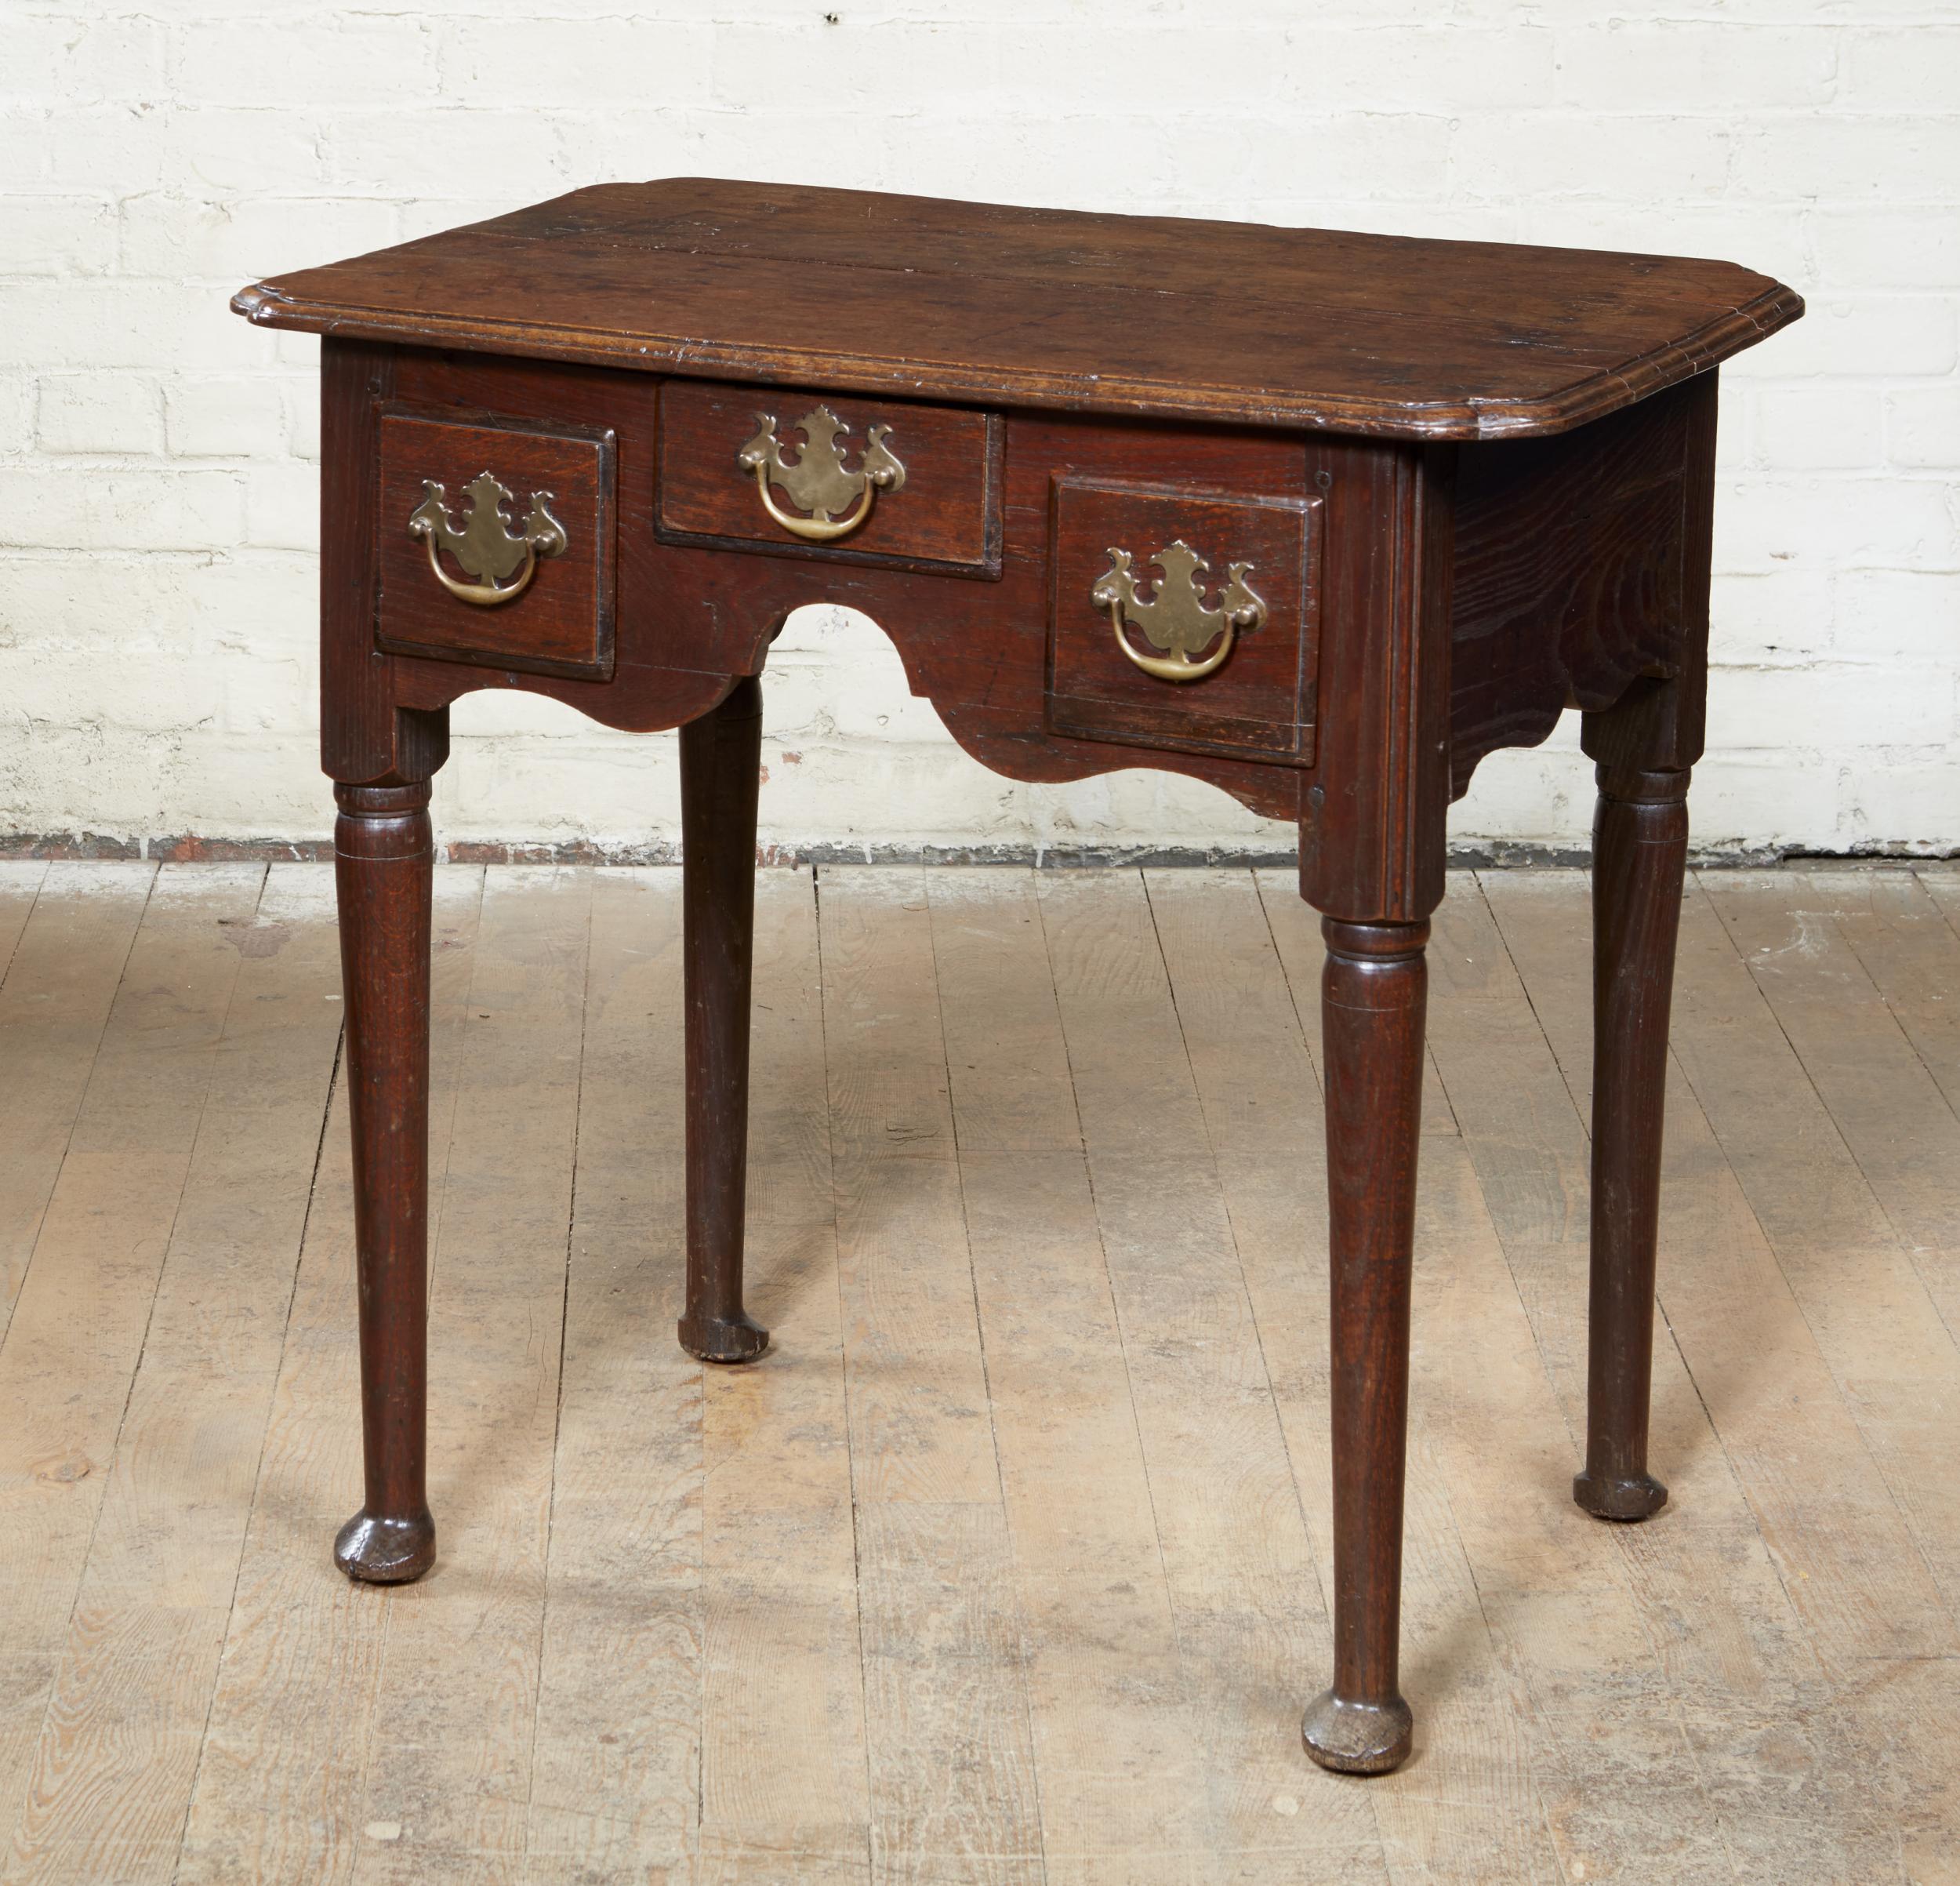 Fine George I period oak lowboy having exaggerated re-entrant (baby's bum) corners, over two deep and one shallow drawer each with brass batwing pulls, over scalloped apron and standing on turned legs ending in pad feet, unusually facing back to